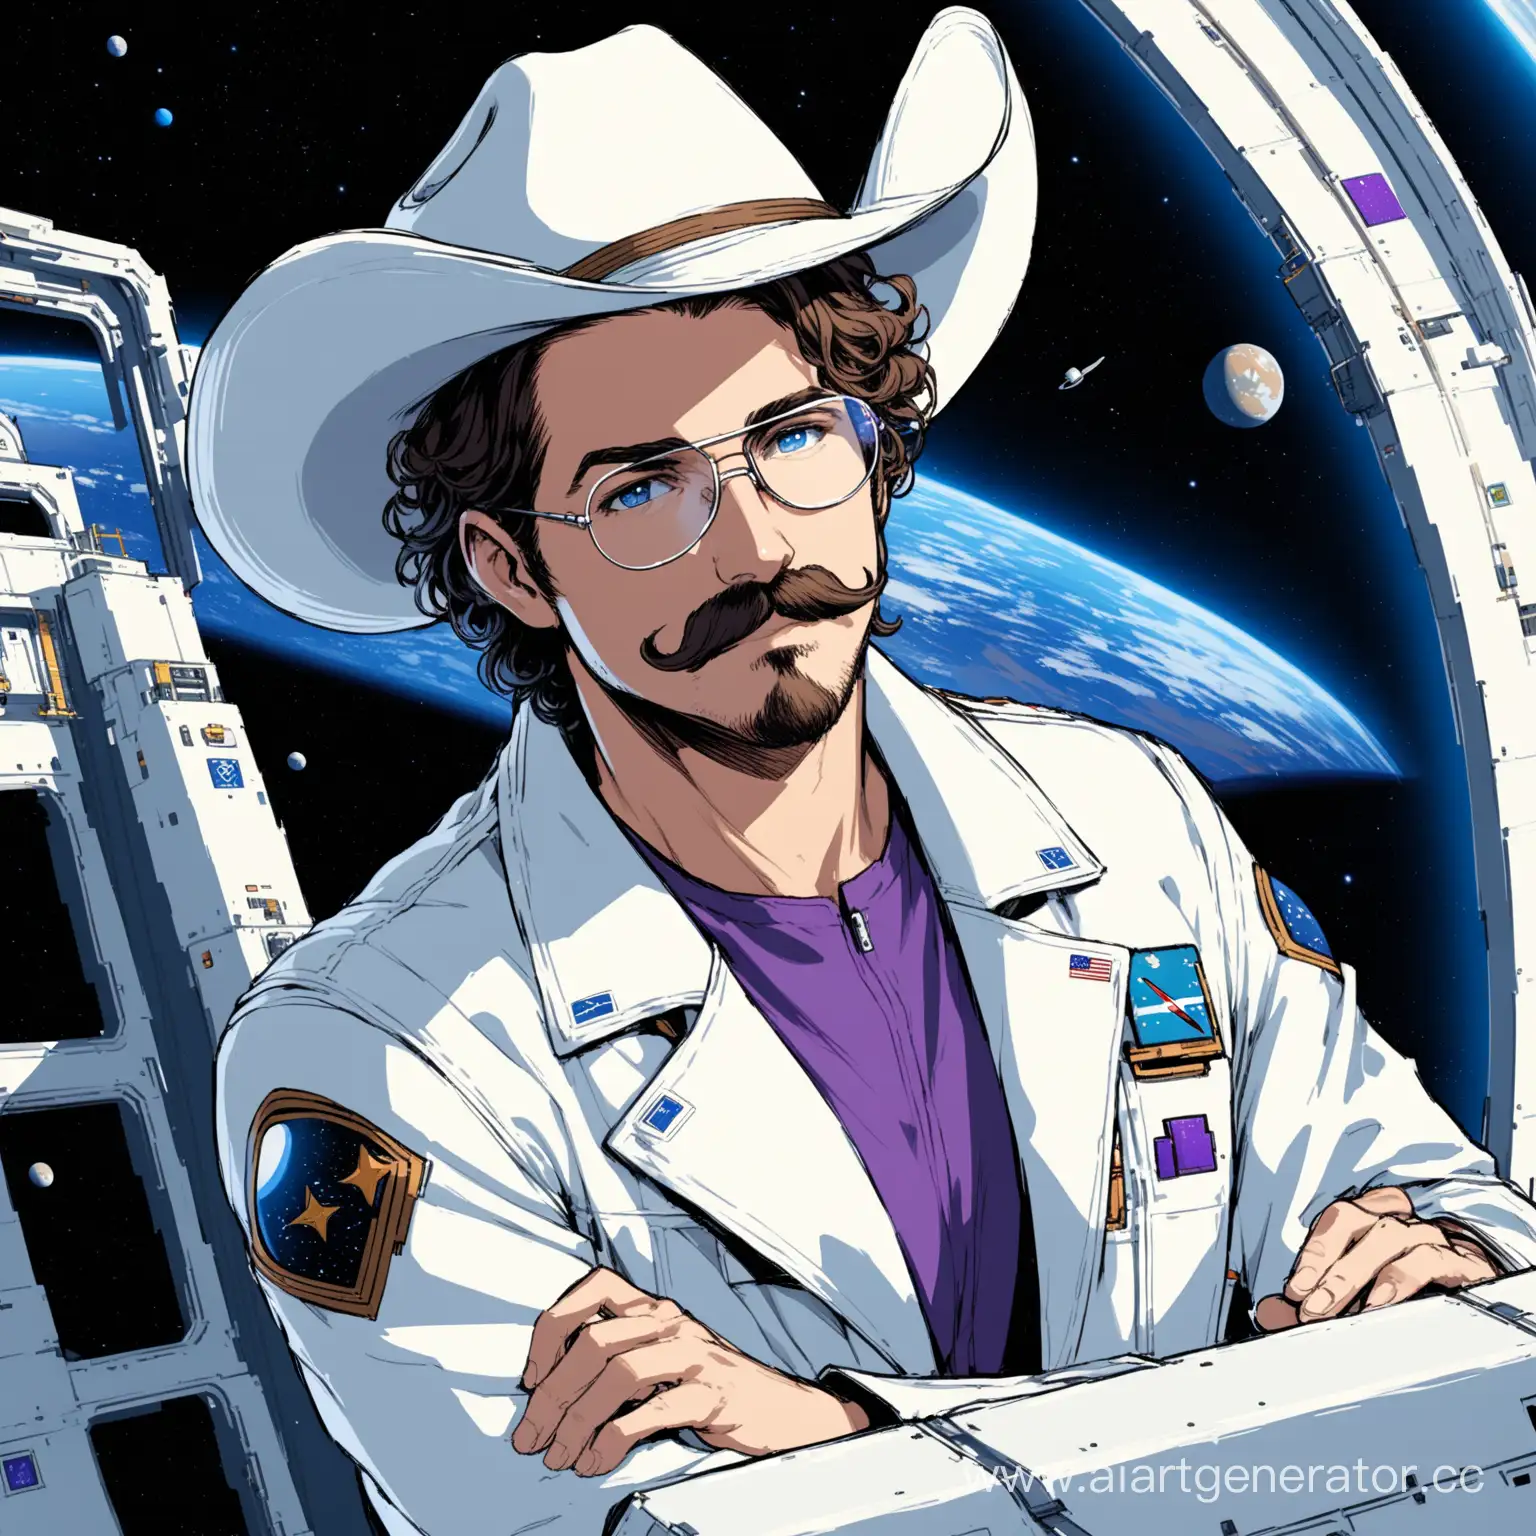 Curly-Mustached-Scientist-in-Aviator-Glasses-on-Space-Station